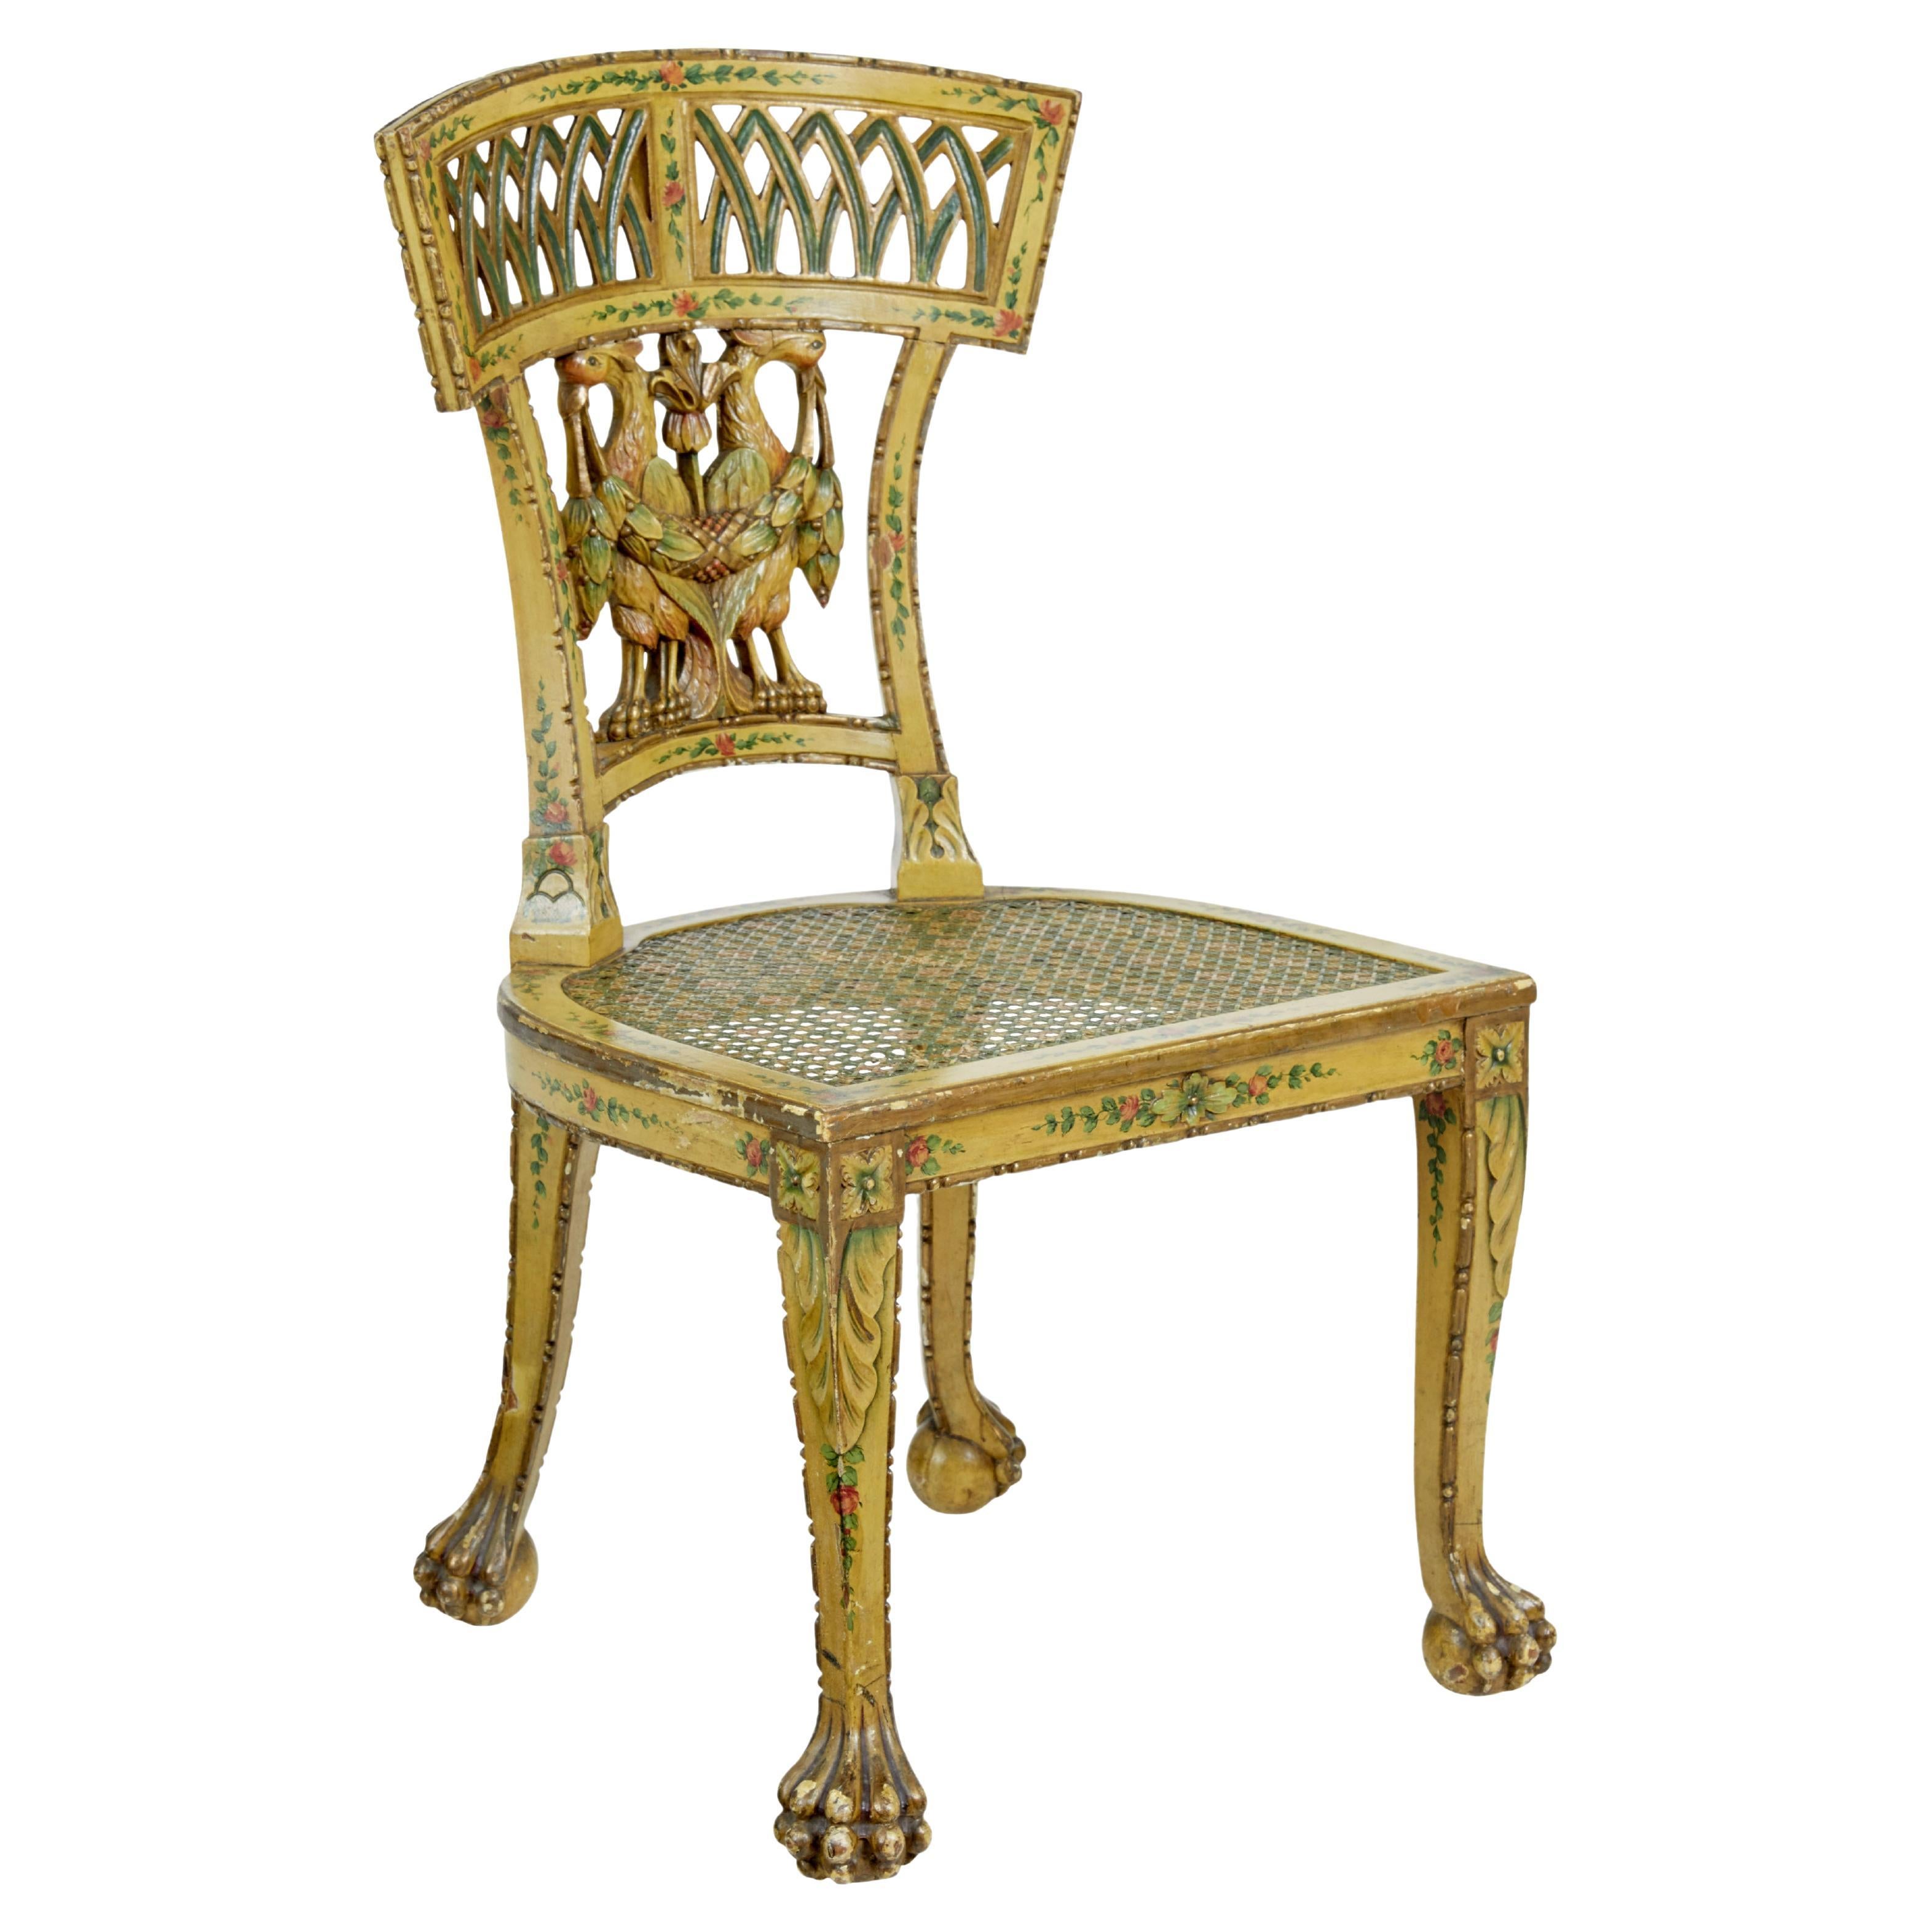 19th century Biedermeier carved and painted cane chair For Sale